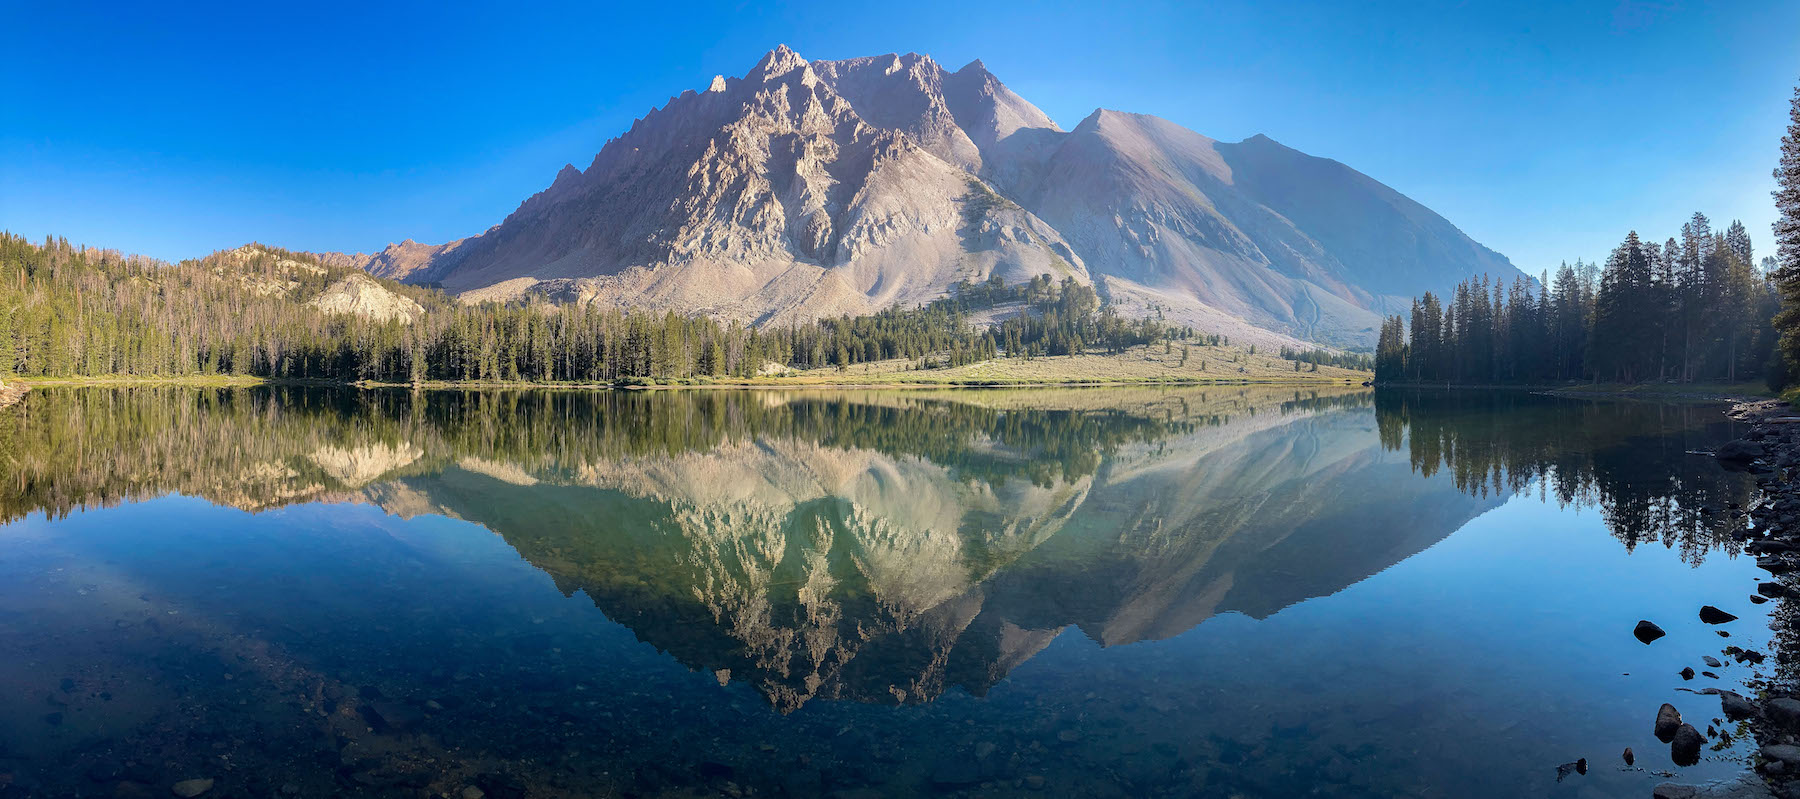 Reflection of Castle Peak in Idaho's White Clouds Mountains